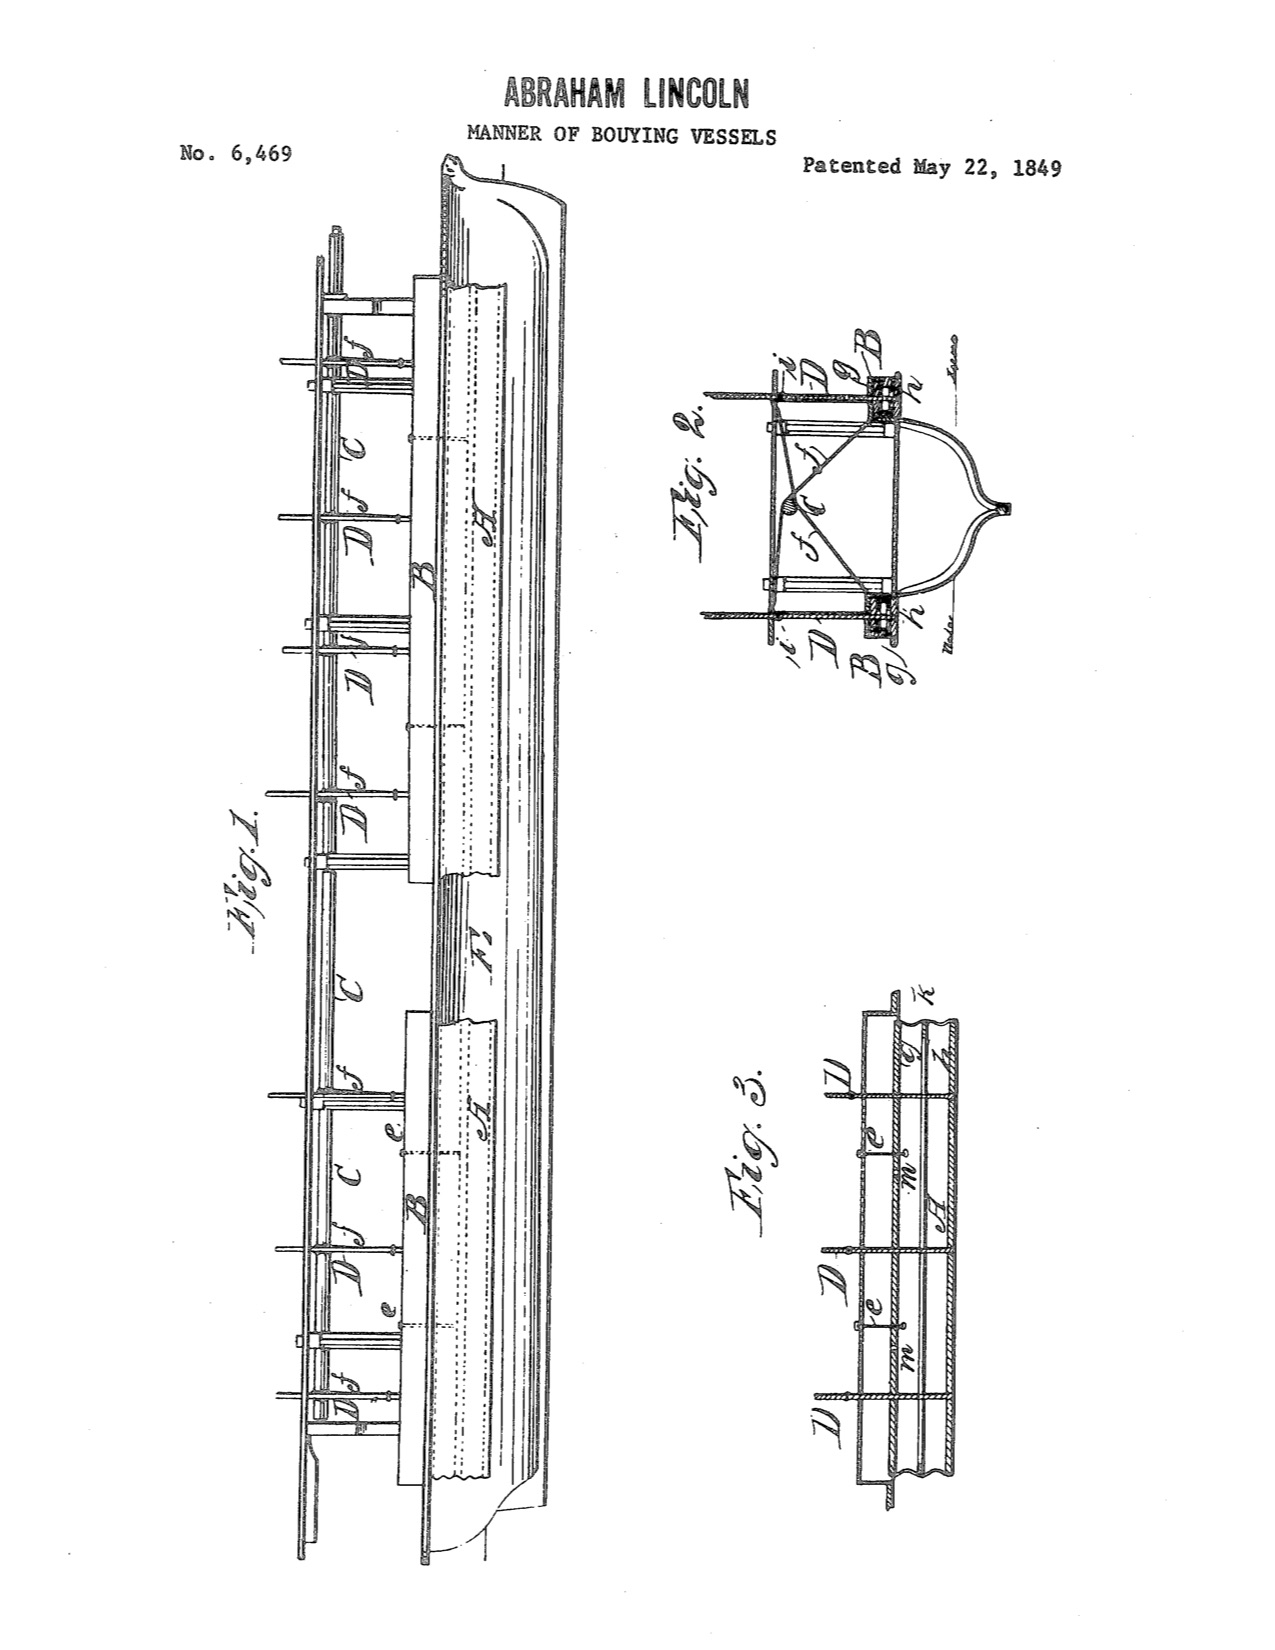 Abraham Lincoln's patent (Source: United States Patent and Trademark Office, www.uspto.gov)